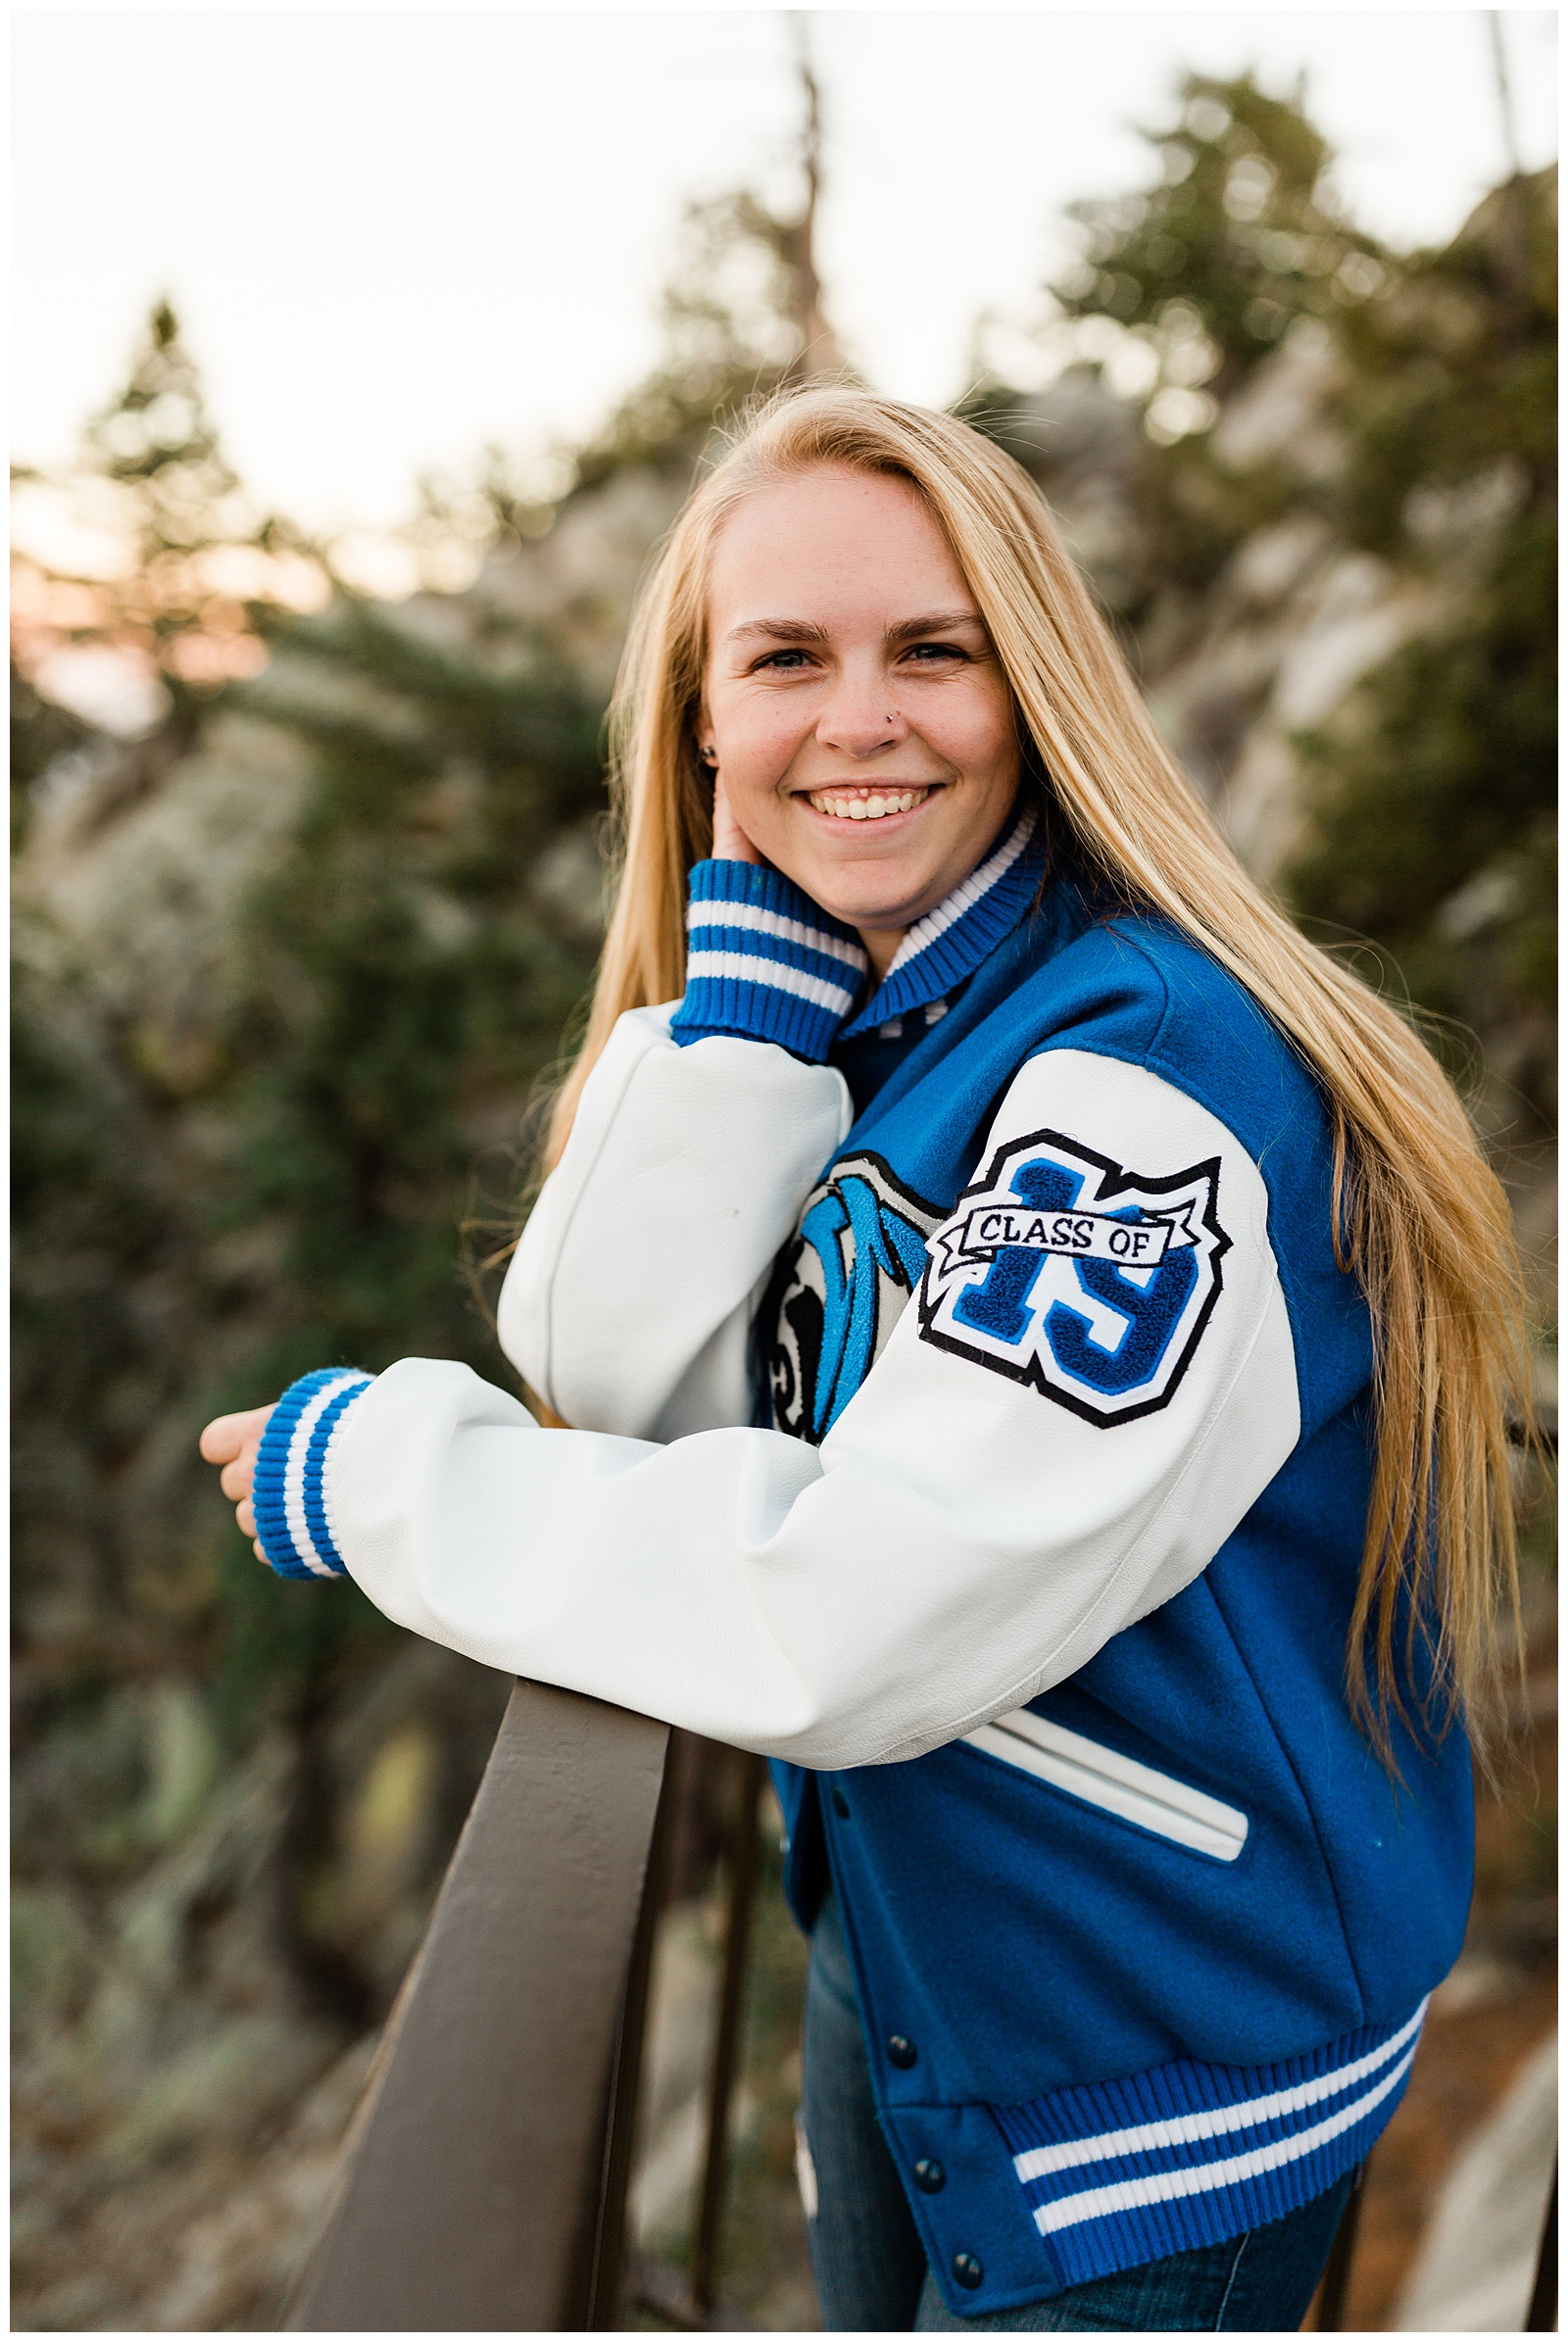 senior portraits in the mountains in the fall with blue and white high school letterman jacket